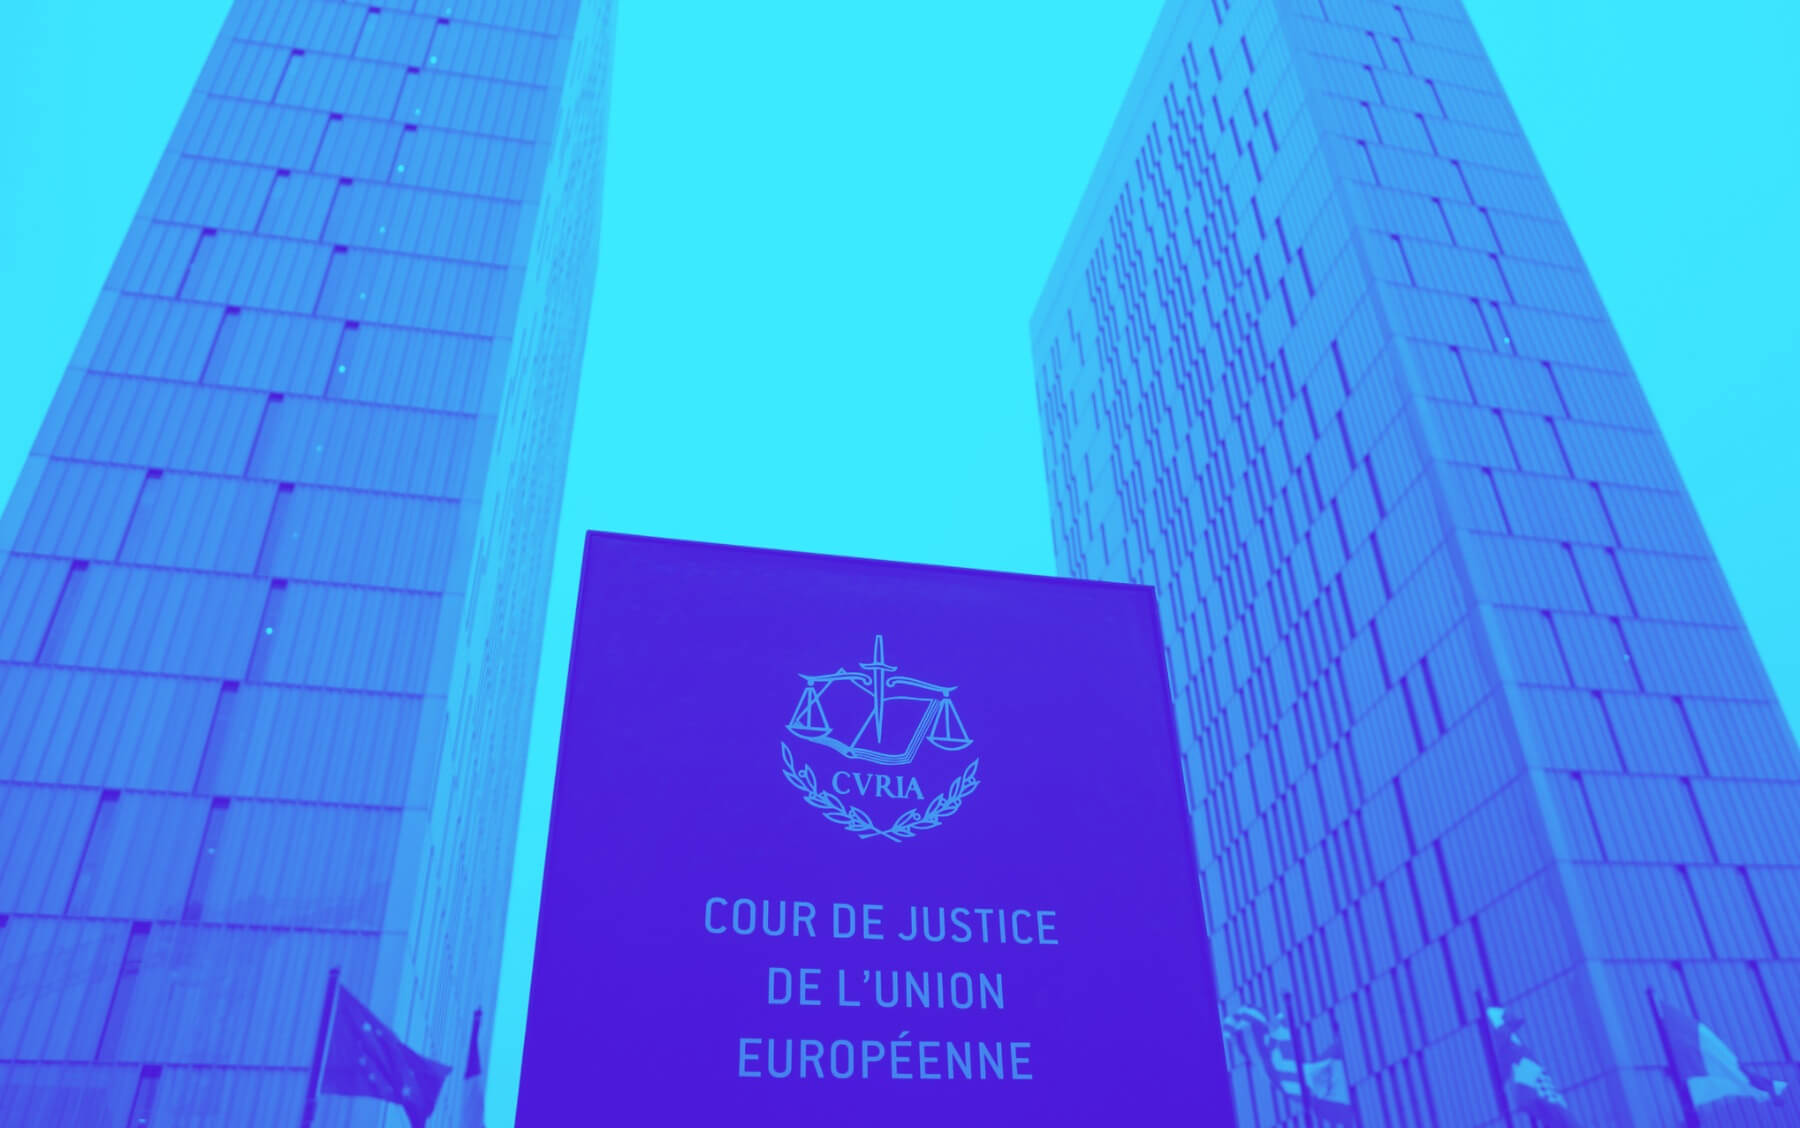 EU's top court says member countries can order Facebook to take down illegal content globally